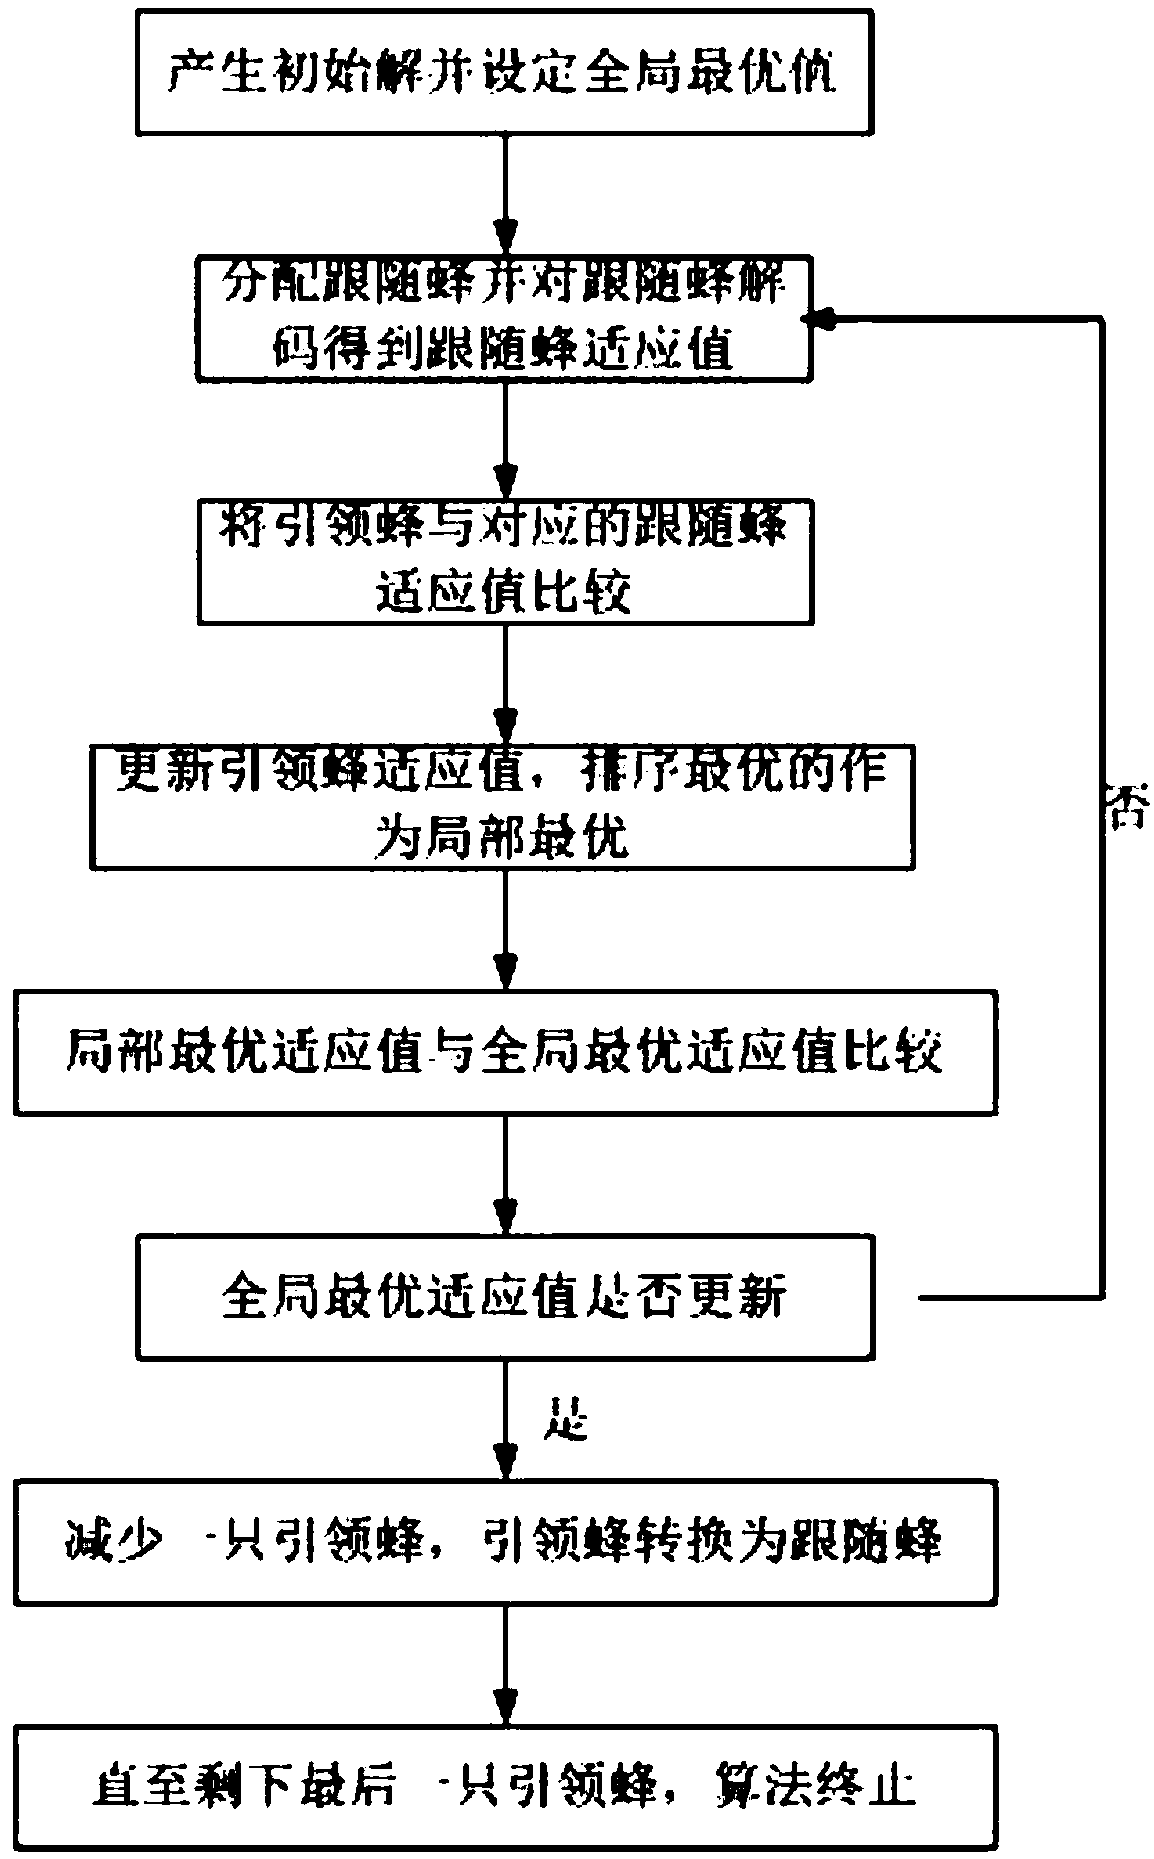 Production and transportation joint scheduling method for continuous production